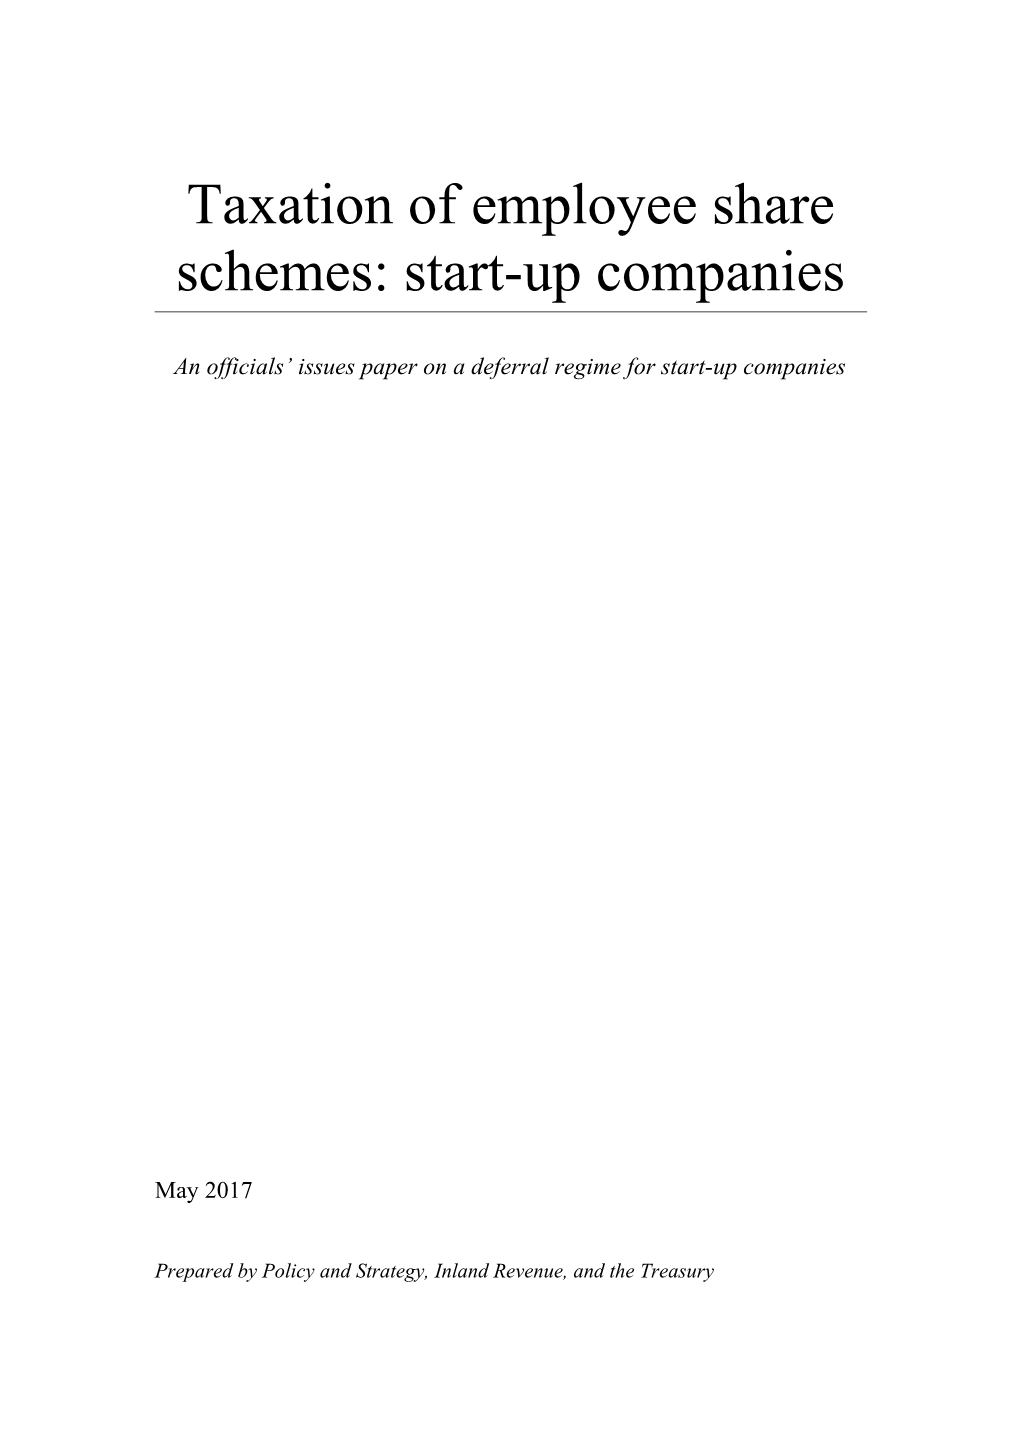 Taxation of Employee Share Schemes: Start-Up Companies (May 2017)